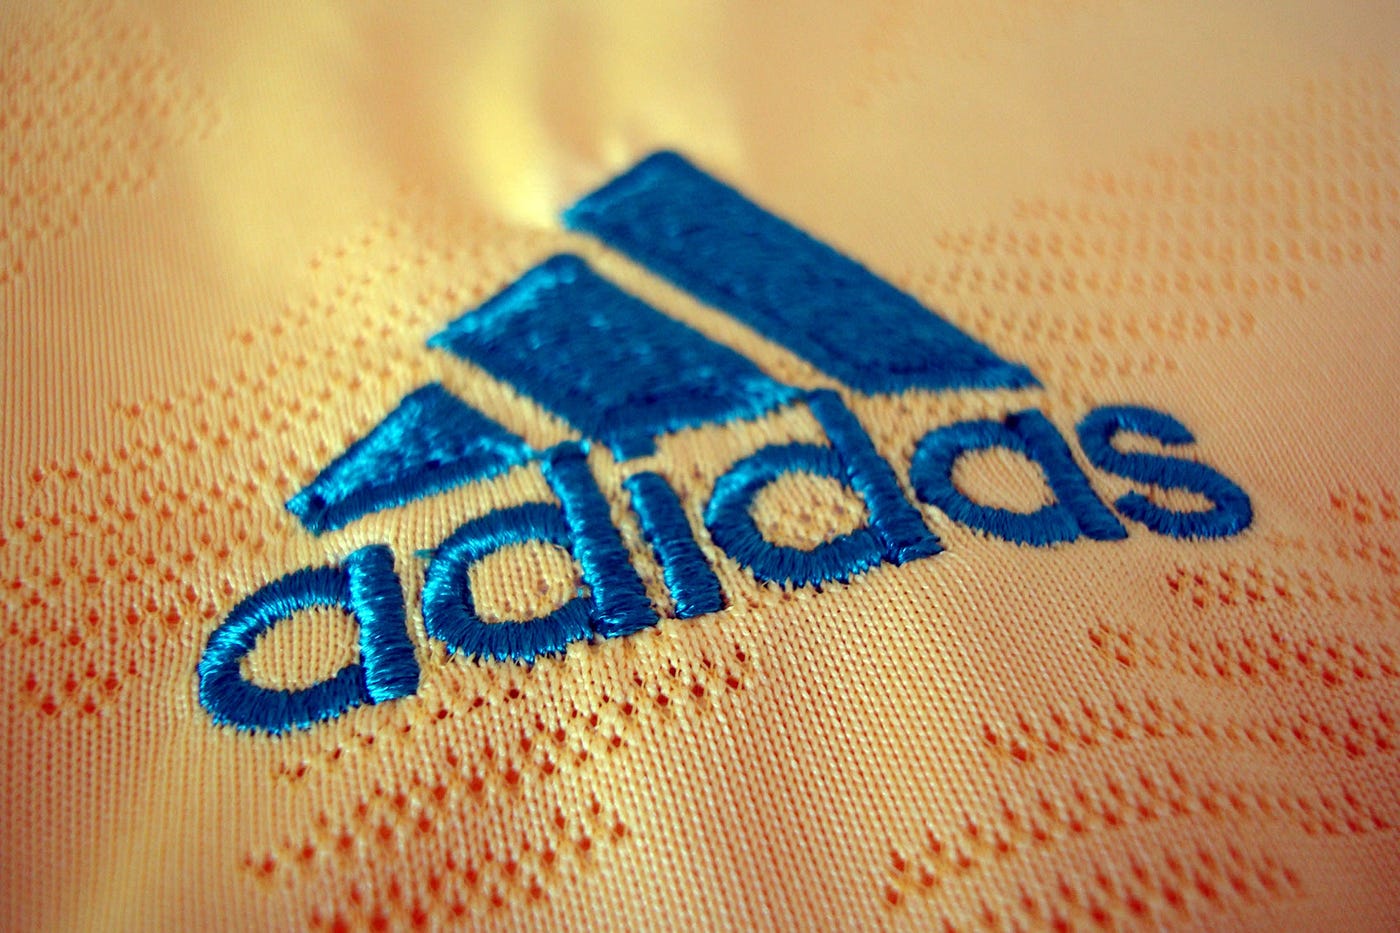 Adidas invests 1 million euros in these startups results | by Brega | Medium